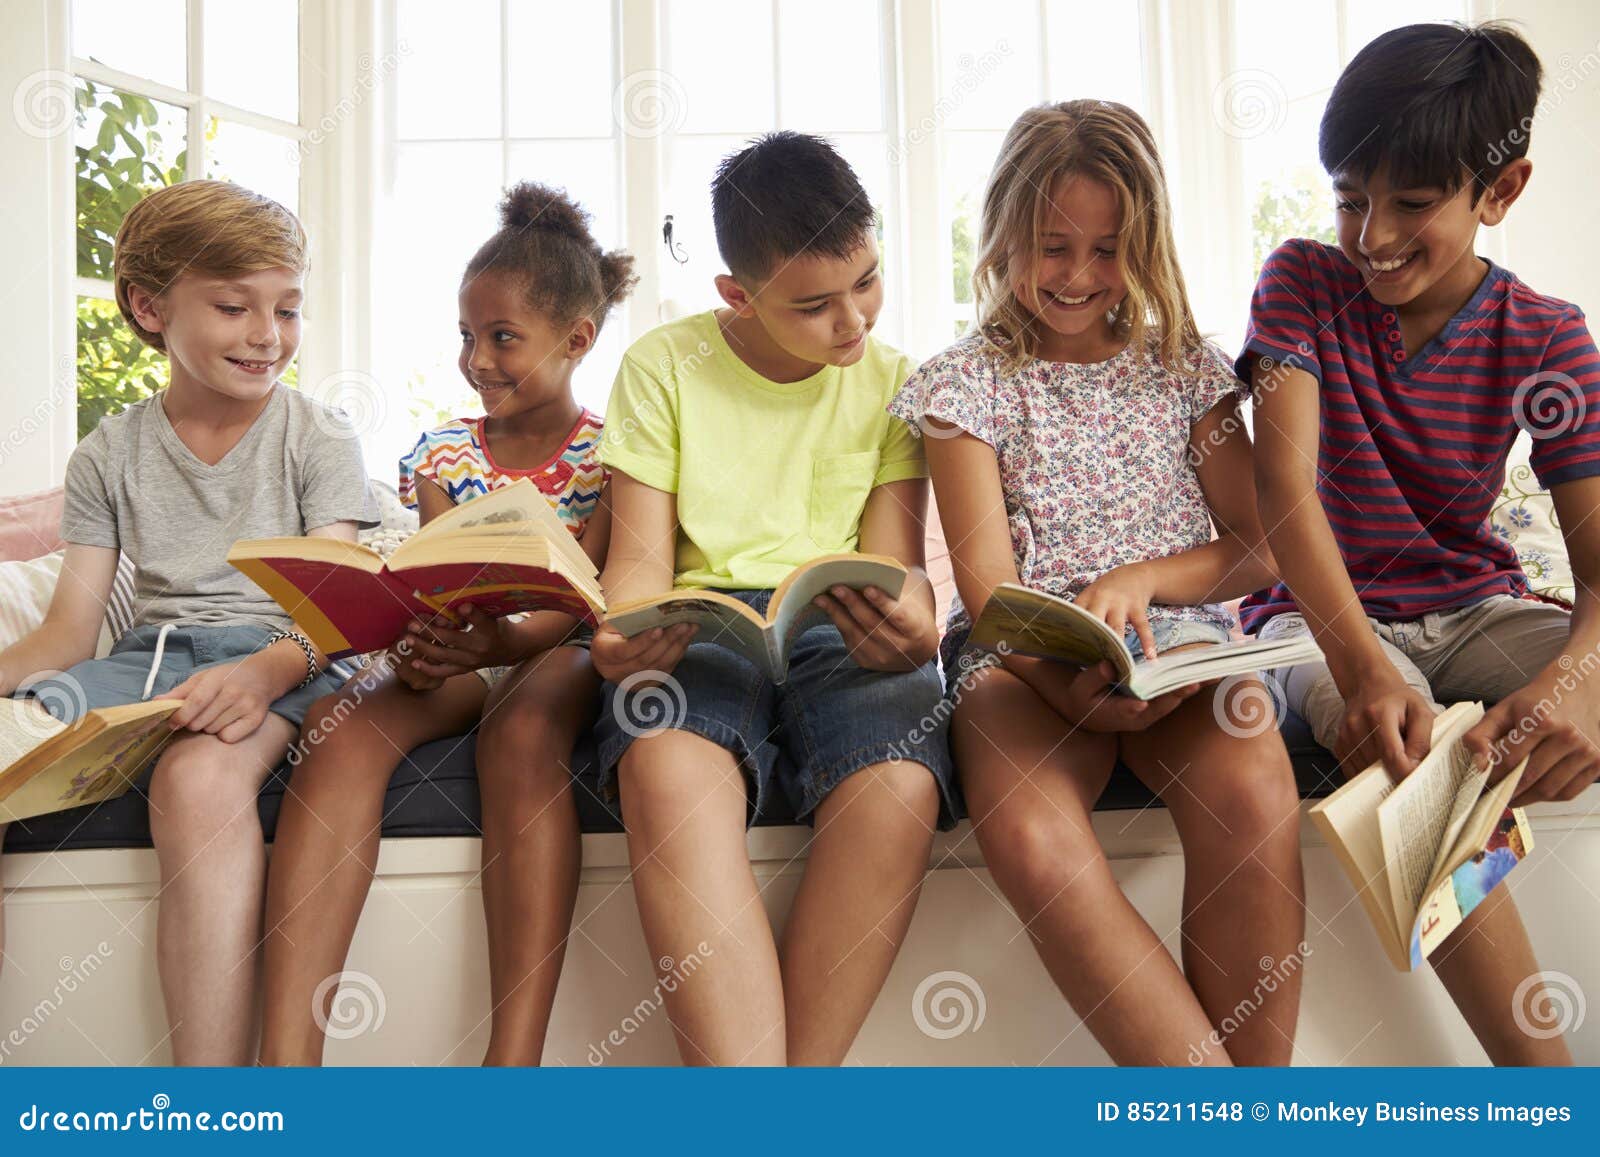 group of multi-cultural children reading on window seat